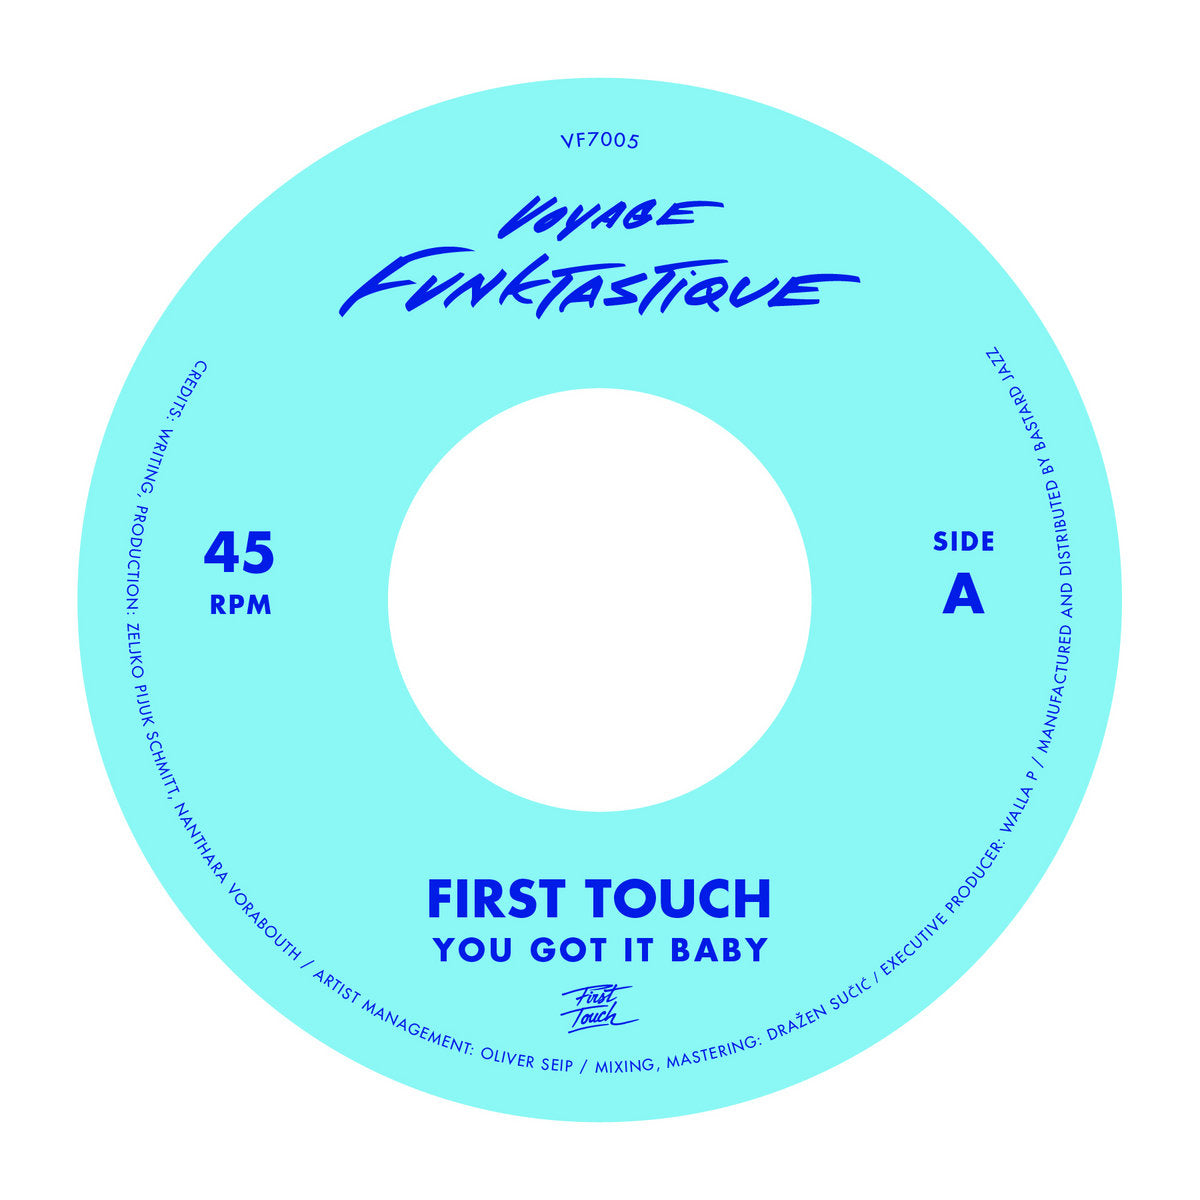 First Touch - You Got it Baby/Crampjuice [7"]